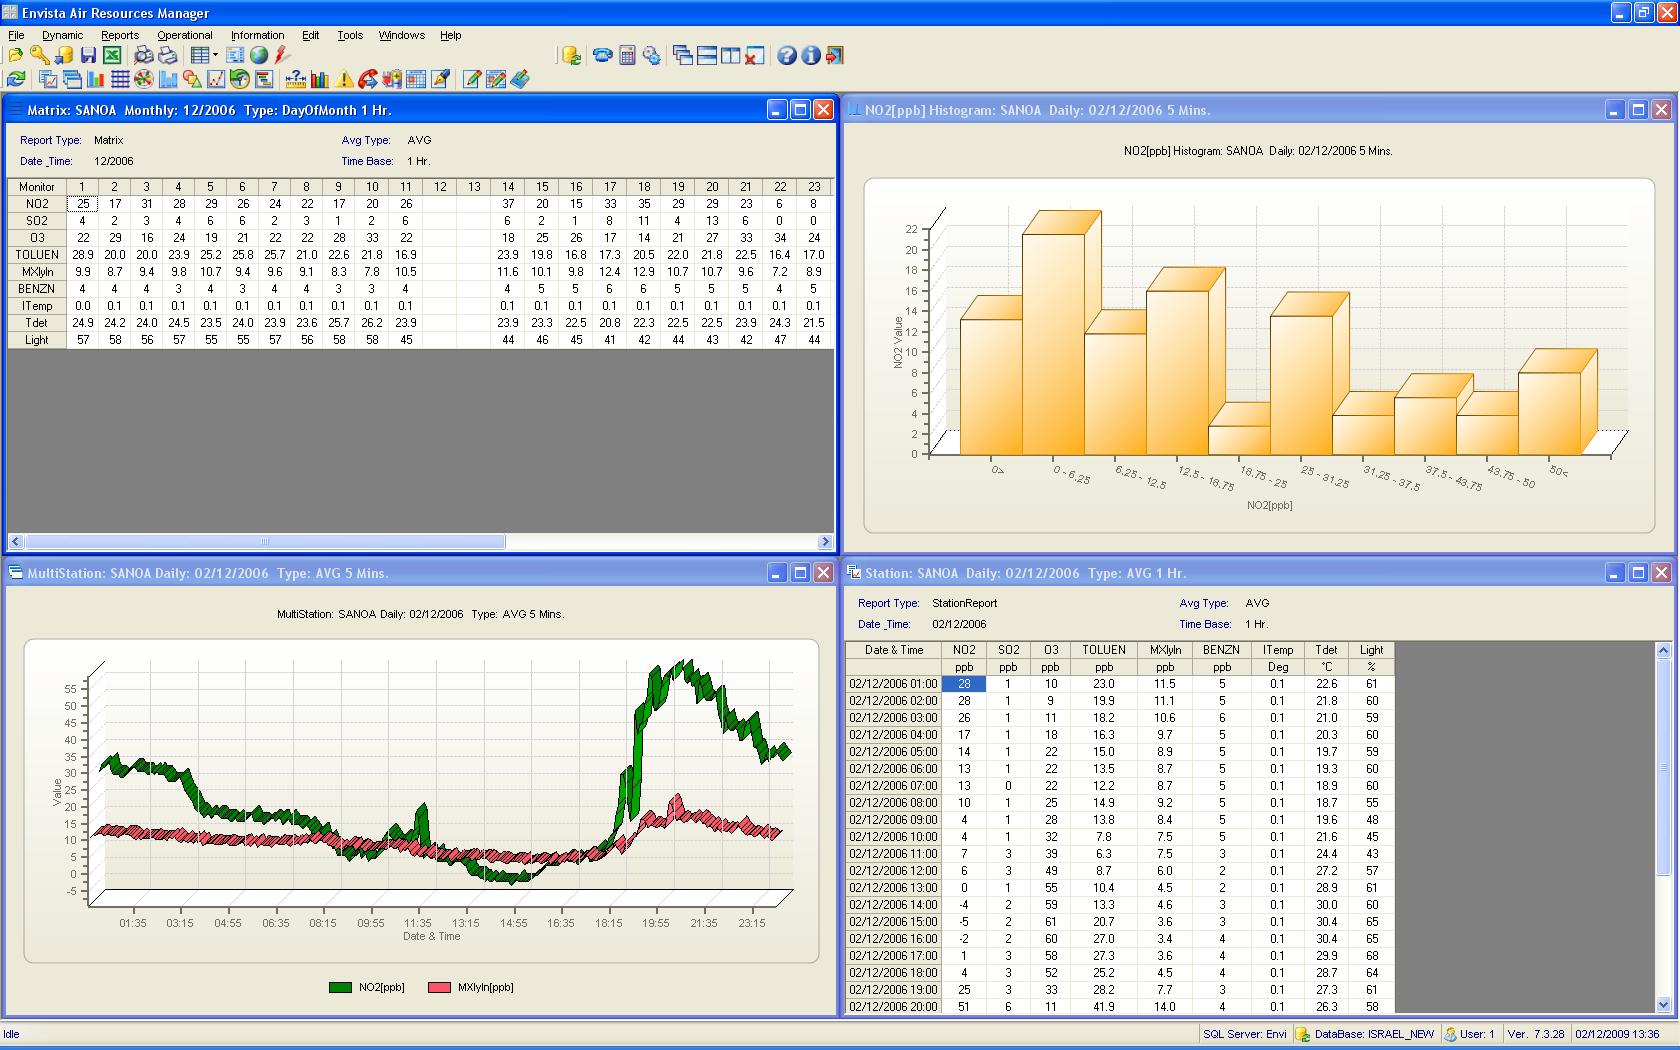 Envitech Envista ARM Reports-Example for 4 Air Monitoring reports from AQM/CEM sites, tiled horizontally using the "Windows" menu